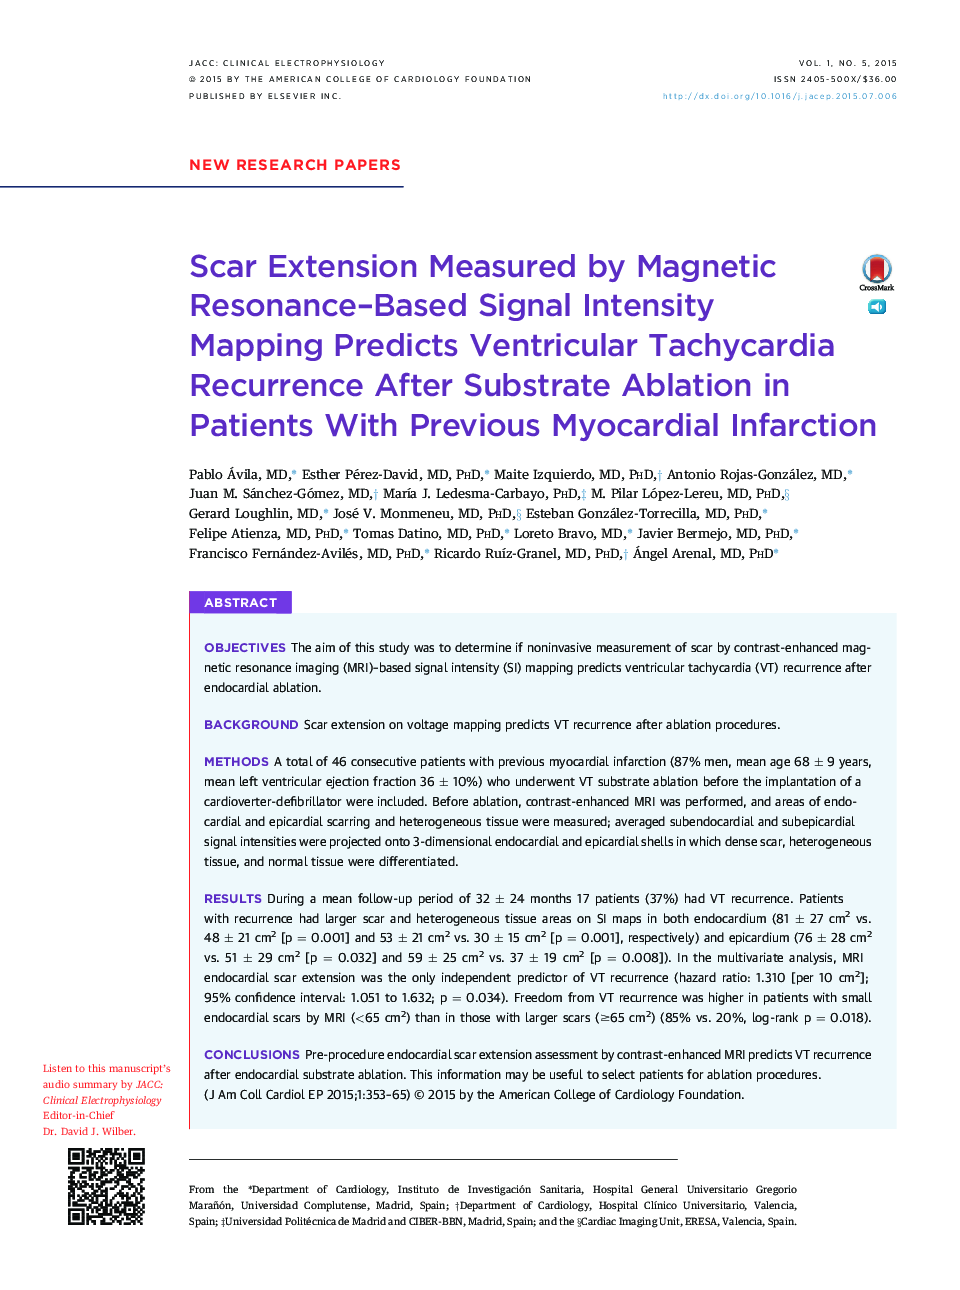 Scar Extension Measured by Magnetic Resonance-Based Signal Intensity MappingÂ Predicts Ventricular Tachycardia Recurrence After Substrate Ablation in Patients With Previous Myocardial Infarction